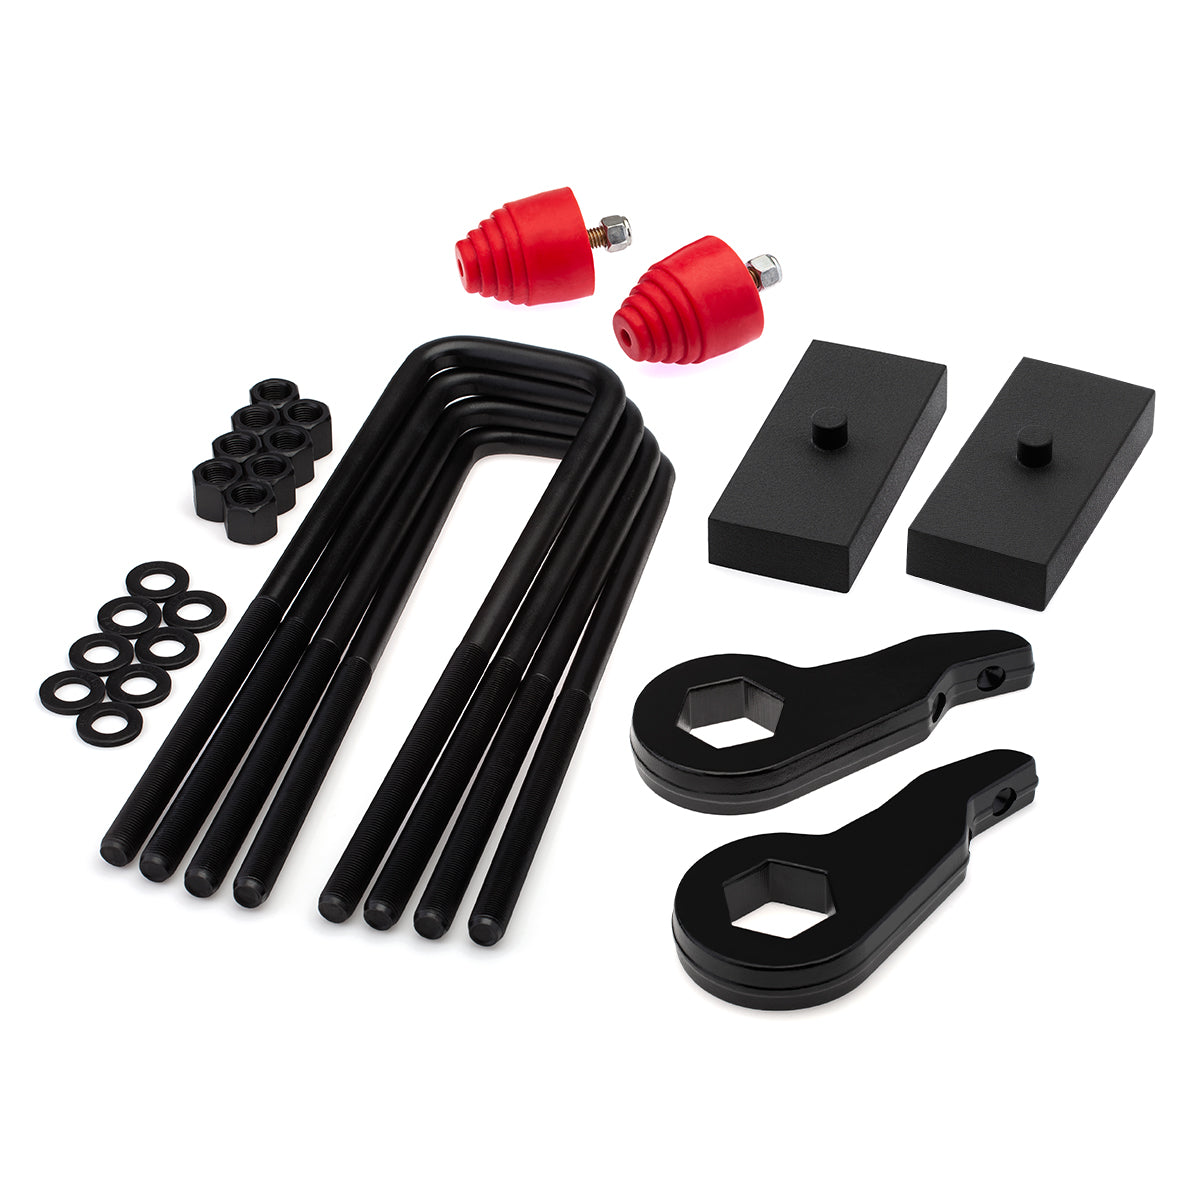 1992-1999 Chevy Suburban 4WD Full Lift Kit with Bump Stops